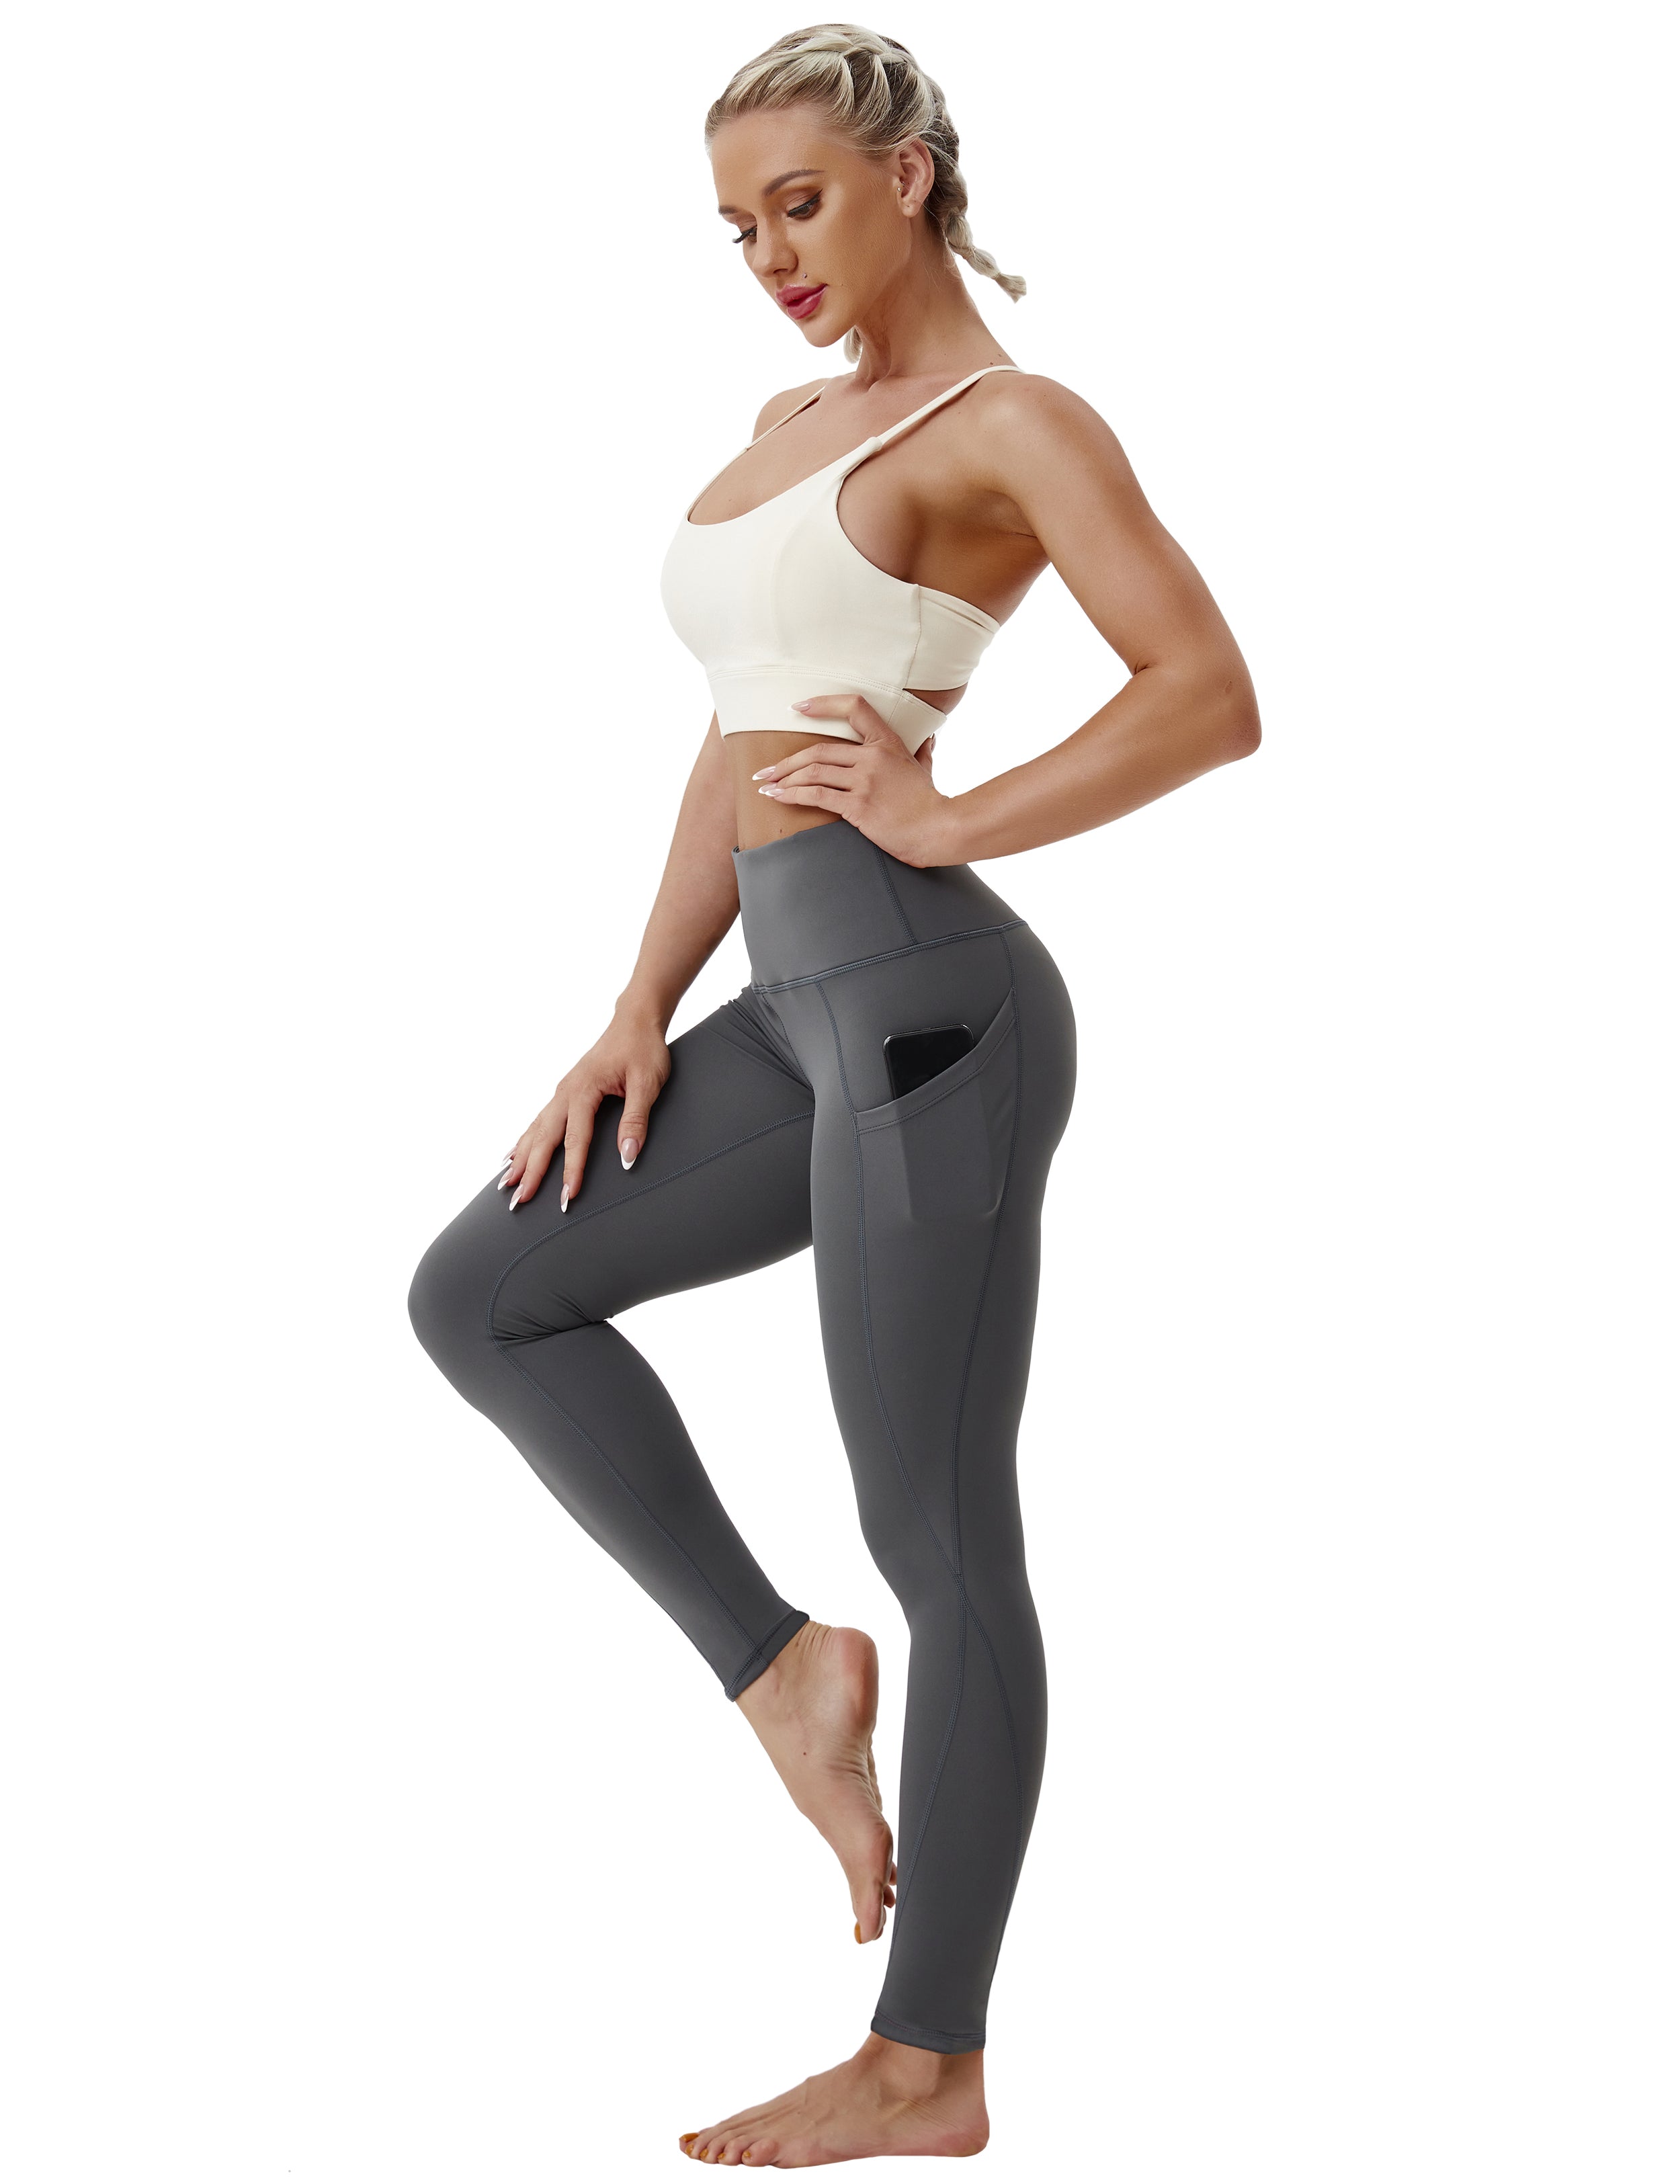 High Waist Side Pockets Gym Pants shadowcharcoal 75% Nylon, 25% Spandex Fabric doesn't attract lint easily 4-way stretch No see-through Moisture-wicking Tummy control Inner pocket